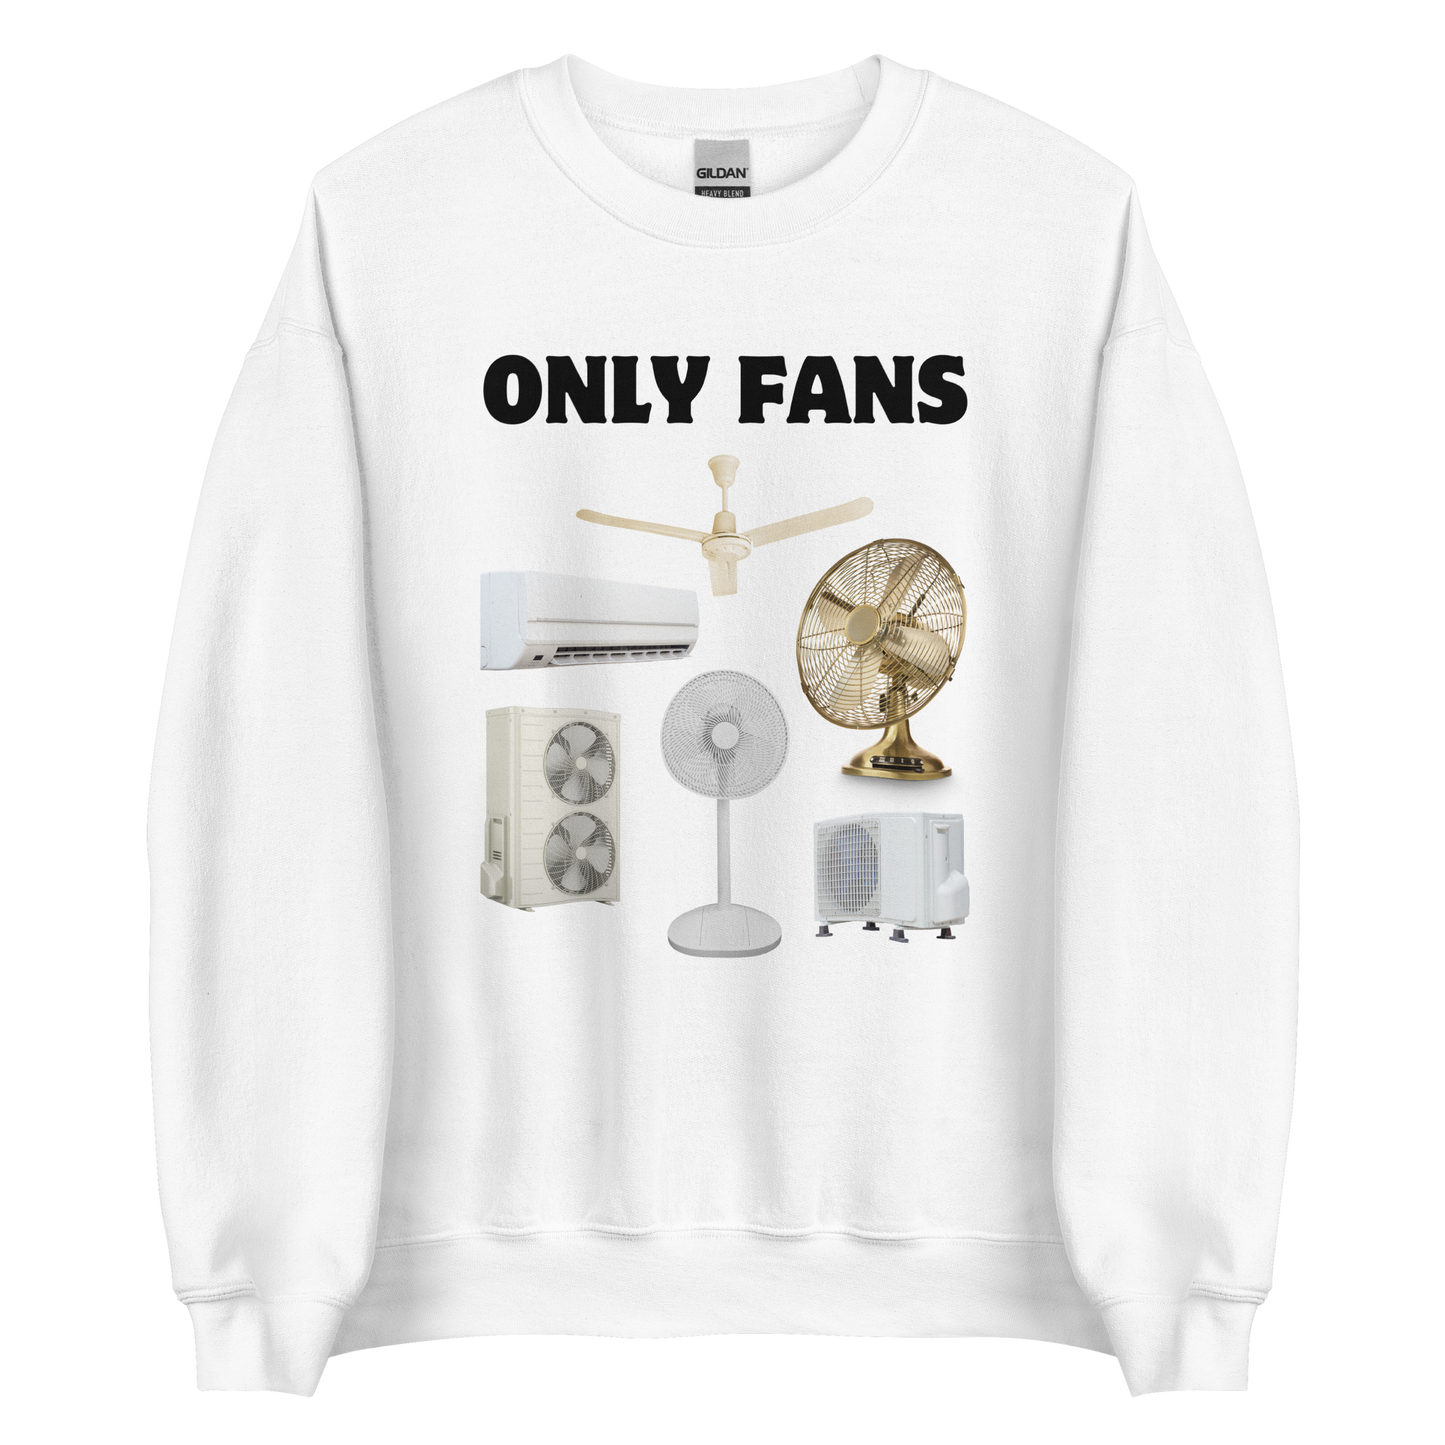 White Only Fans Sweatshirt featuring a fun Fans graphic on the chest - Best Graphic Sweatshirts - Boozy Fox